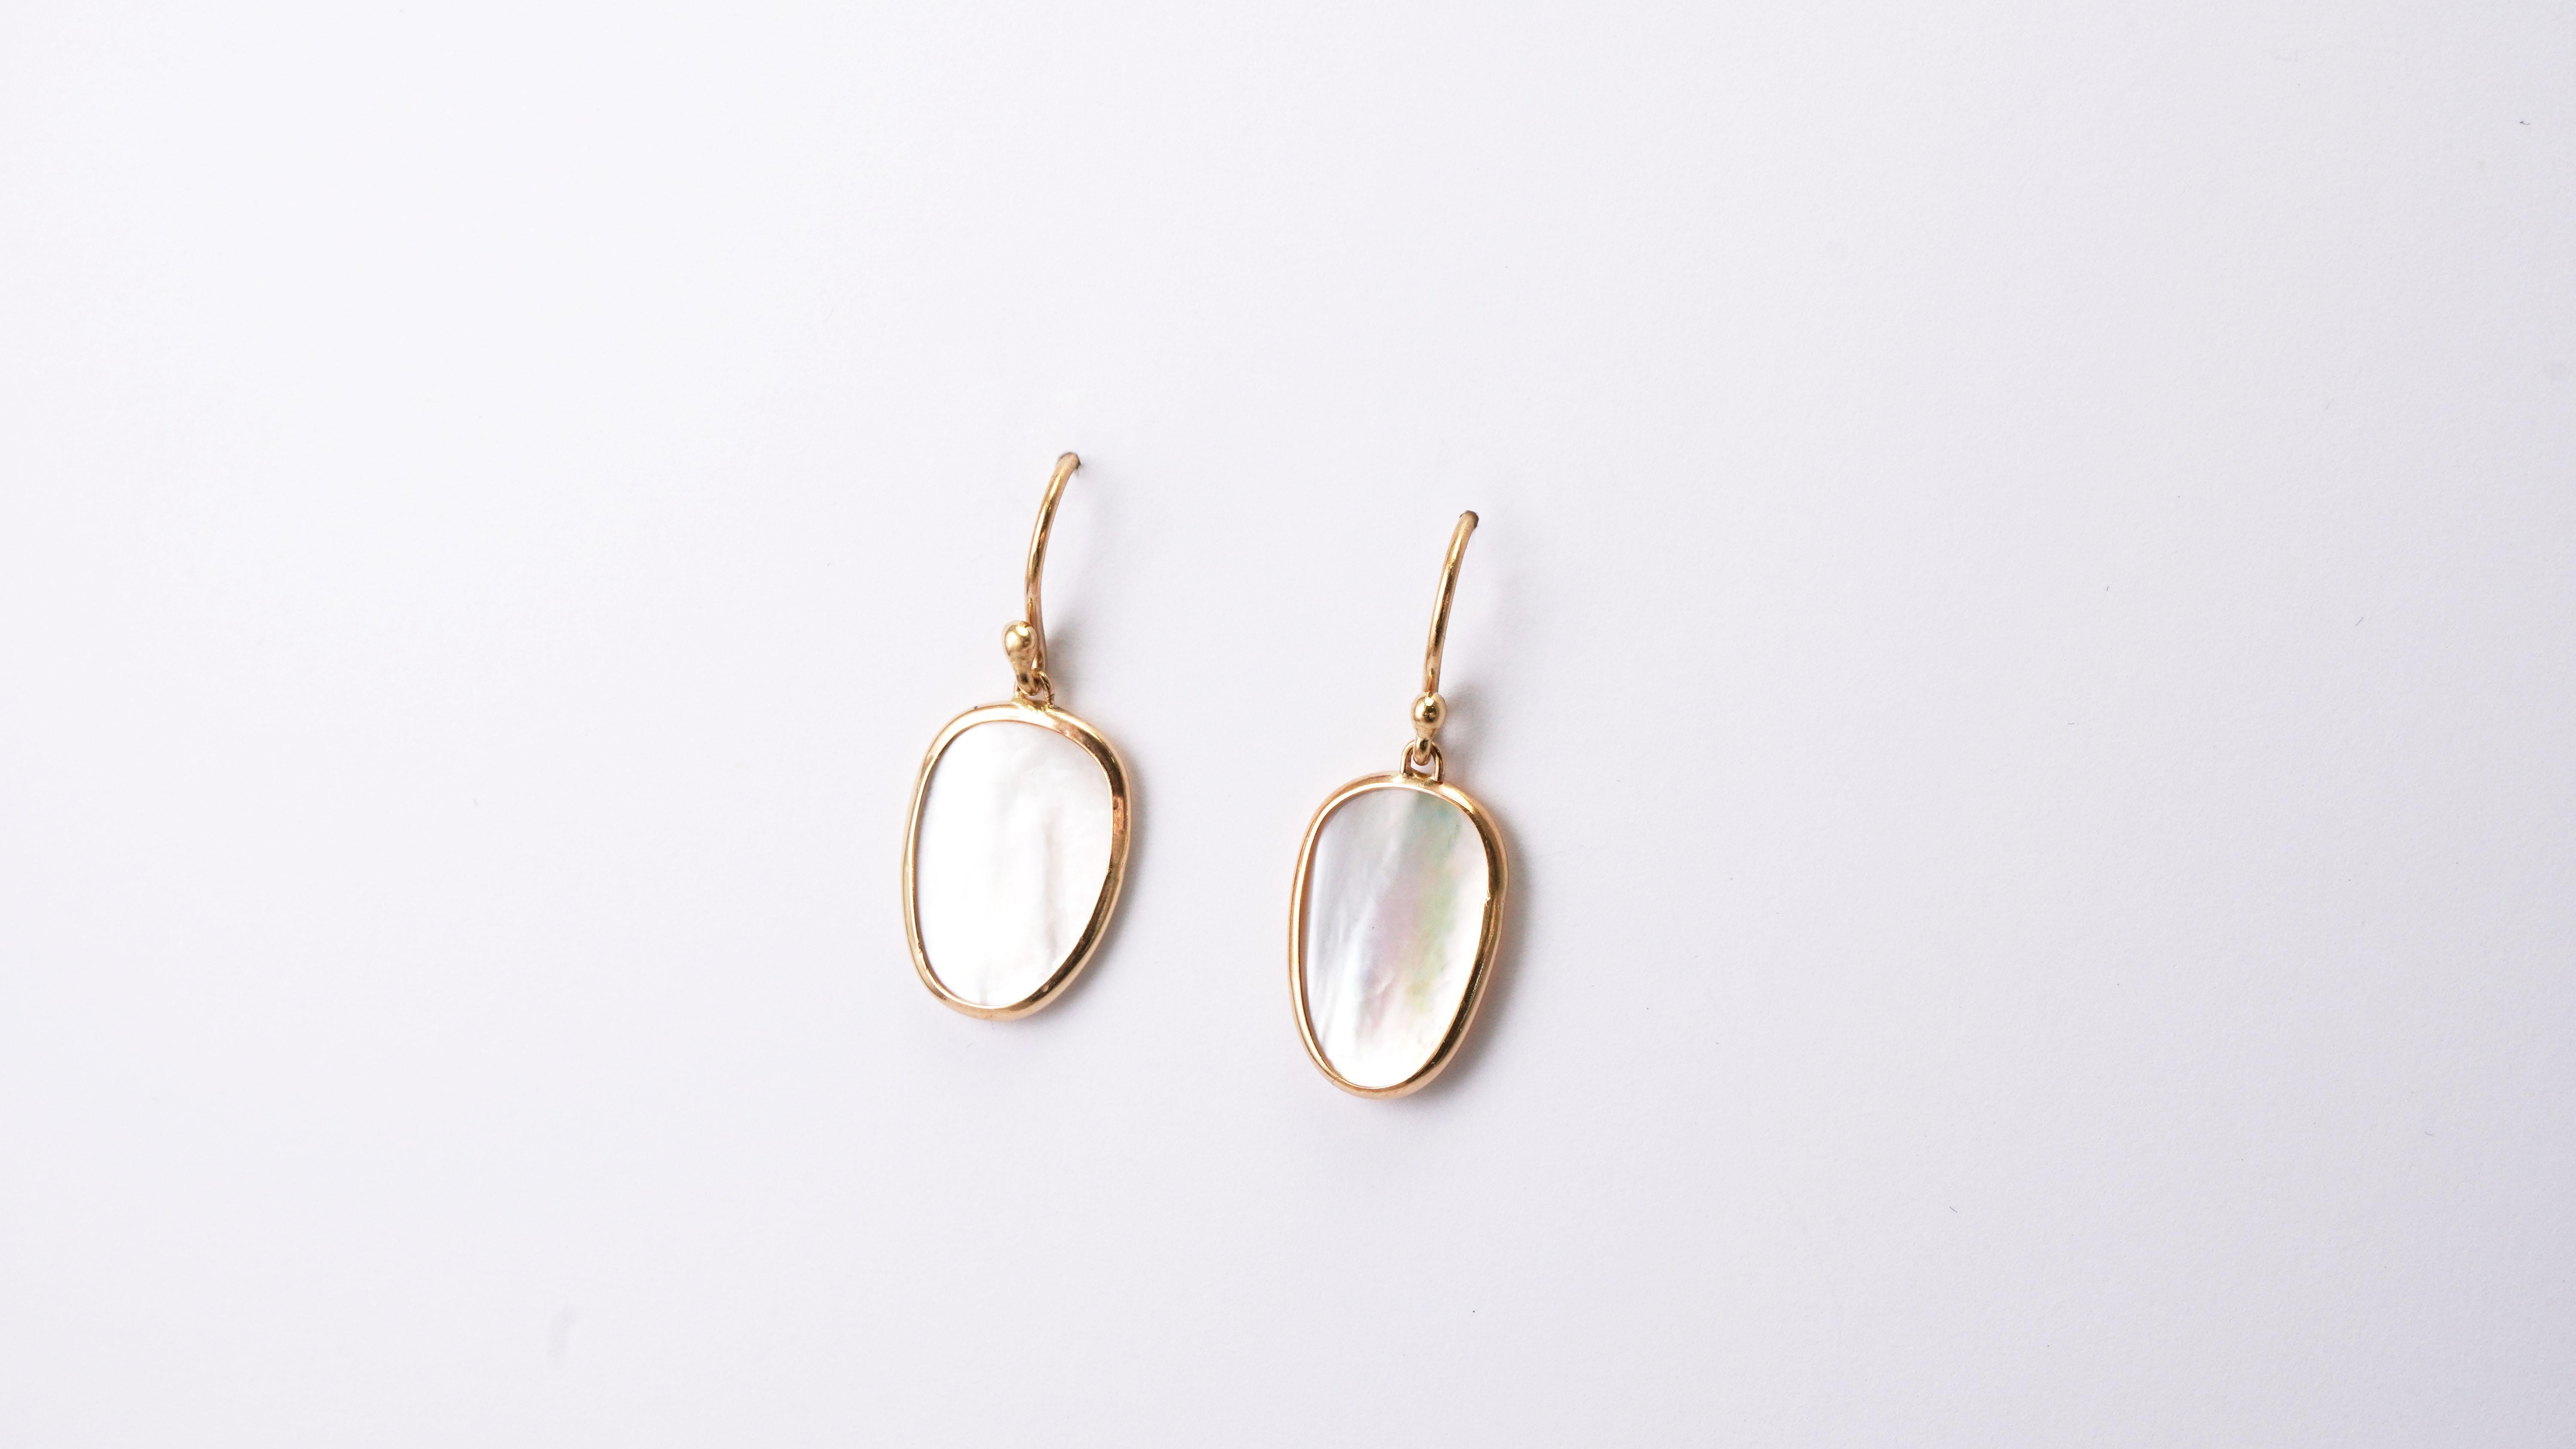 14 kt Gold pair of earrings with Mother of Pearl ( Nacre )
Gold color: Yellow
Dimensions: 28 mm height
Total weight: 2.30 grams

Set with:
- Mother of Pearl ( Nacre )
Cut: Cabochon
Color: White